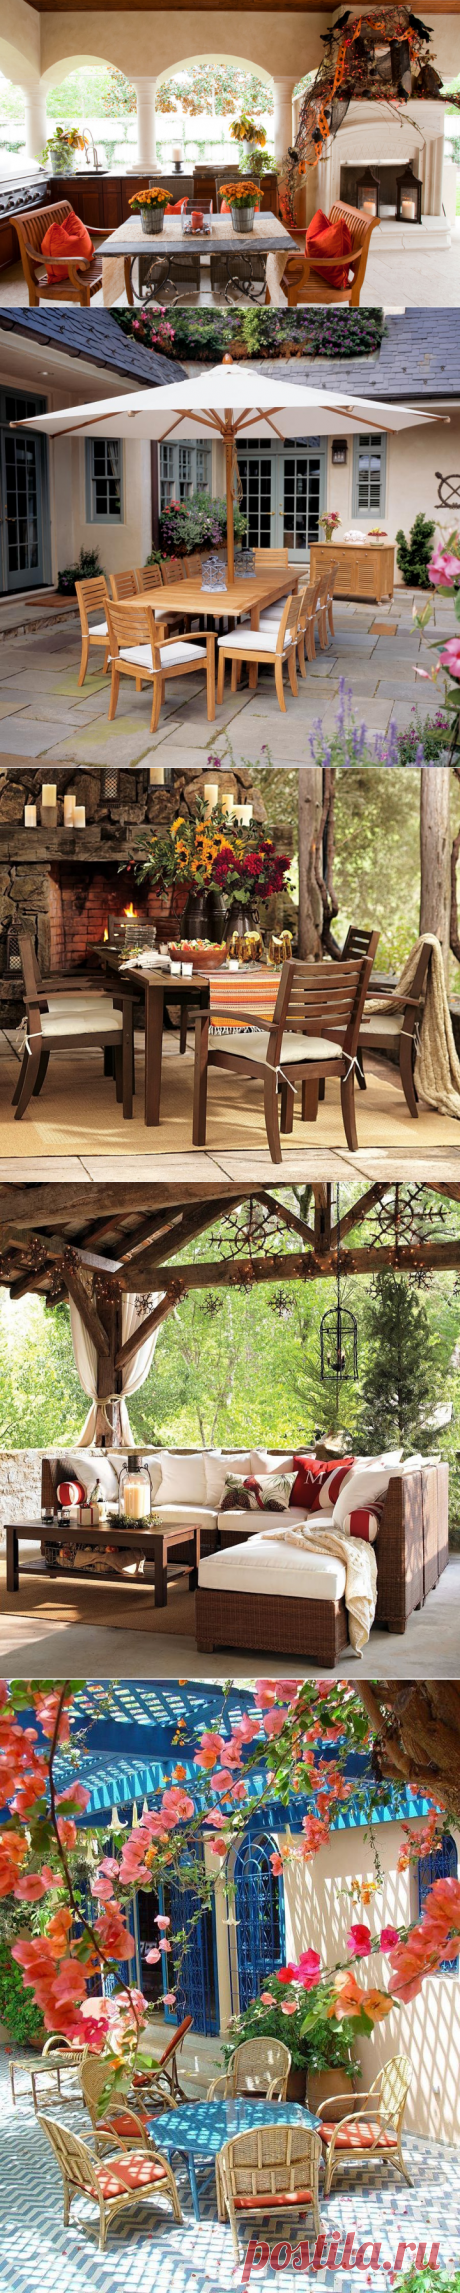 Top 16 Patio Decors And Designs | MostBeautifulThings